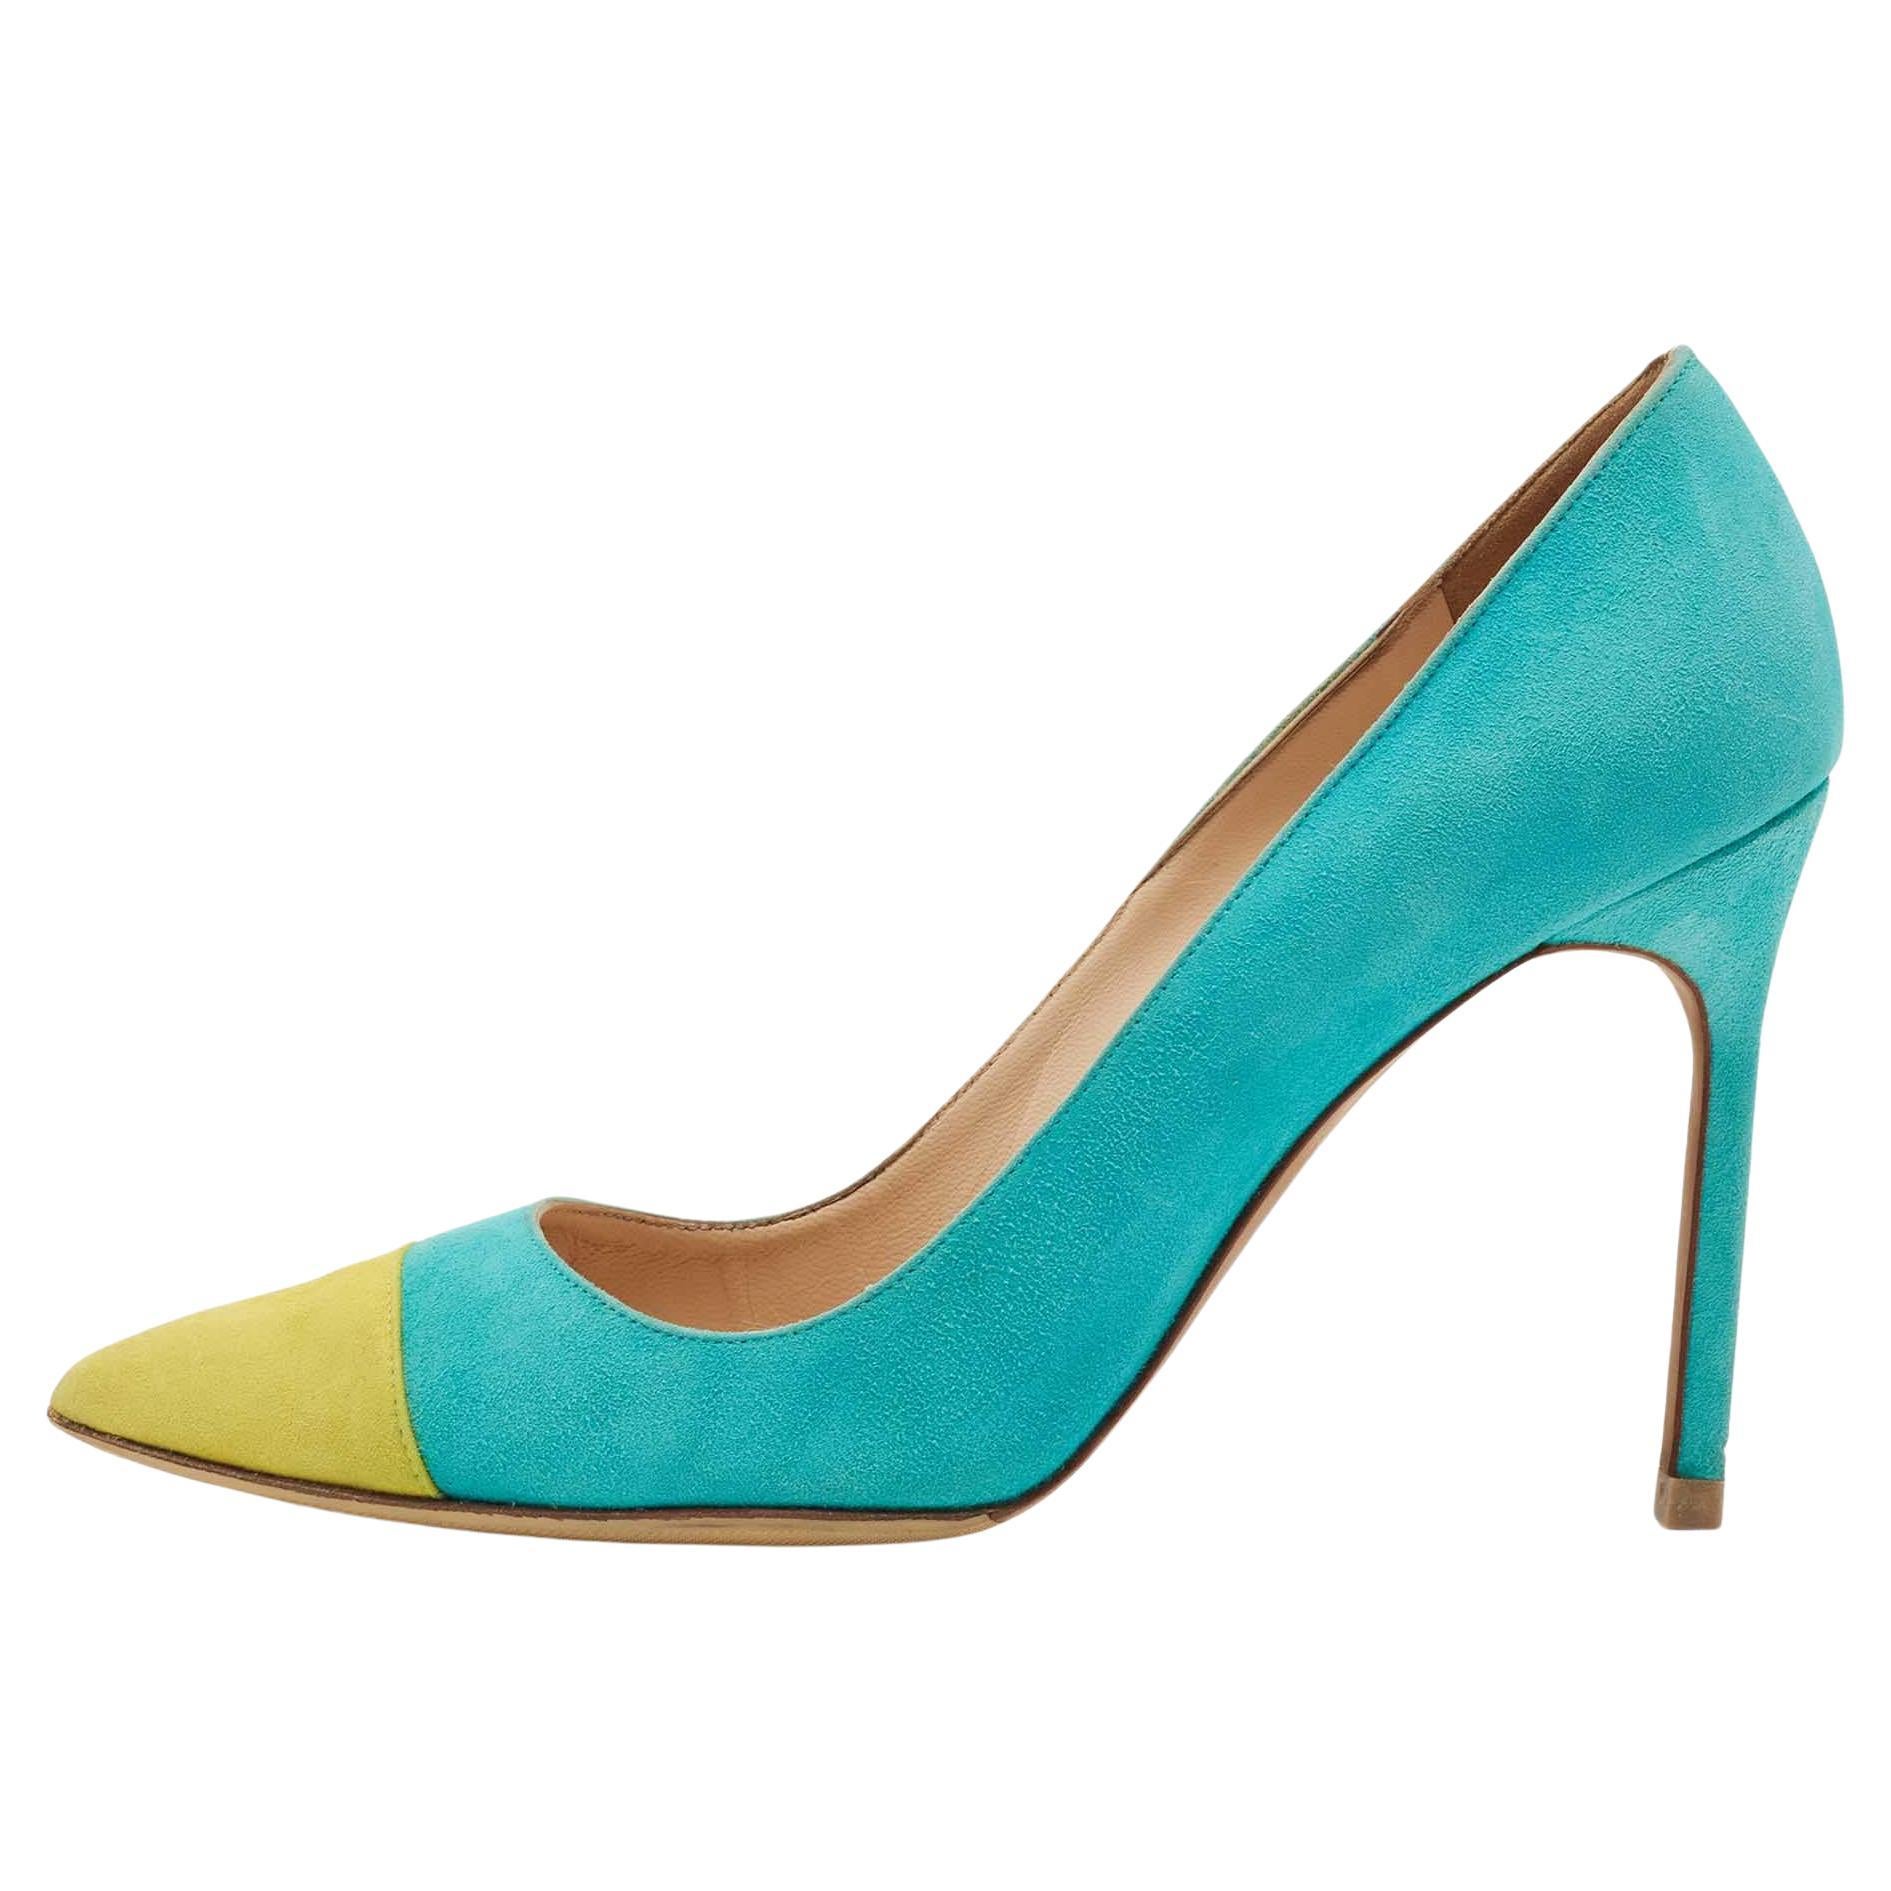 Manolo Blahnik Turquoise/Yellow Suede Bipunta Pumps Size 37.5 For Sale